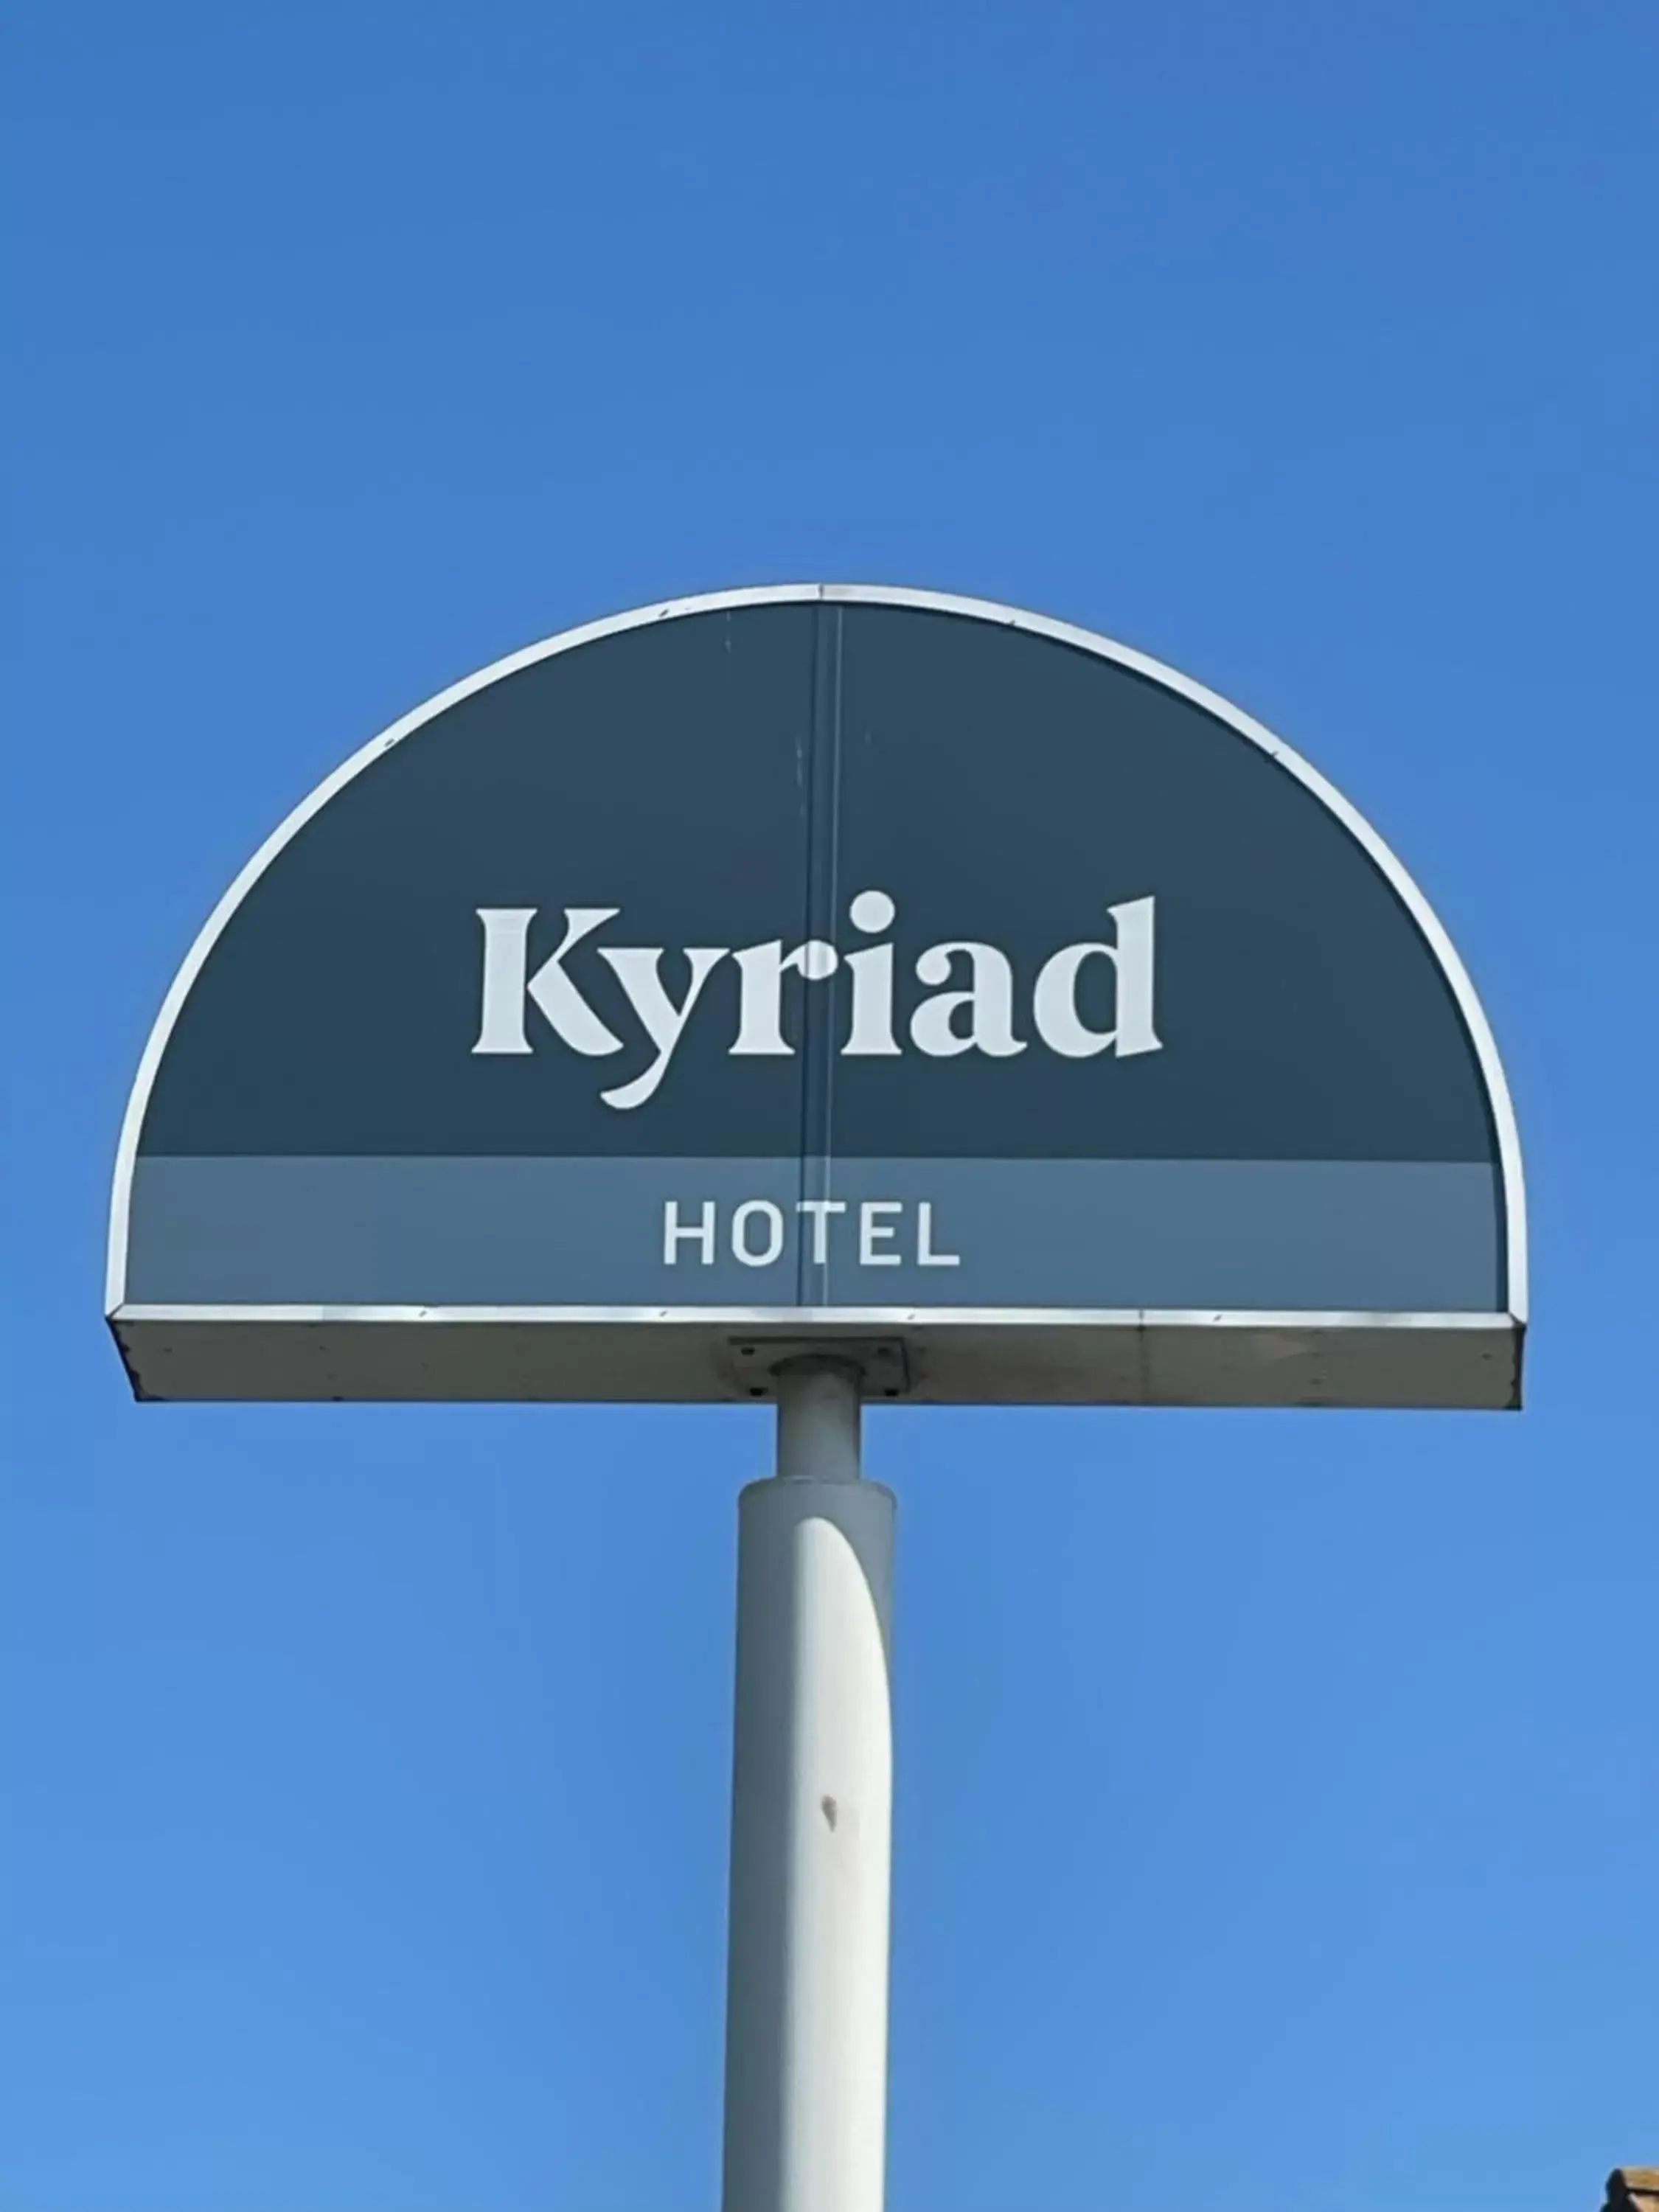 Property logo or sign in Kyriad Paris Sud Les Ulis Courtaboeuf